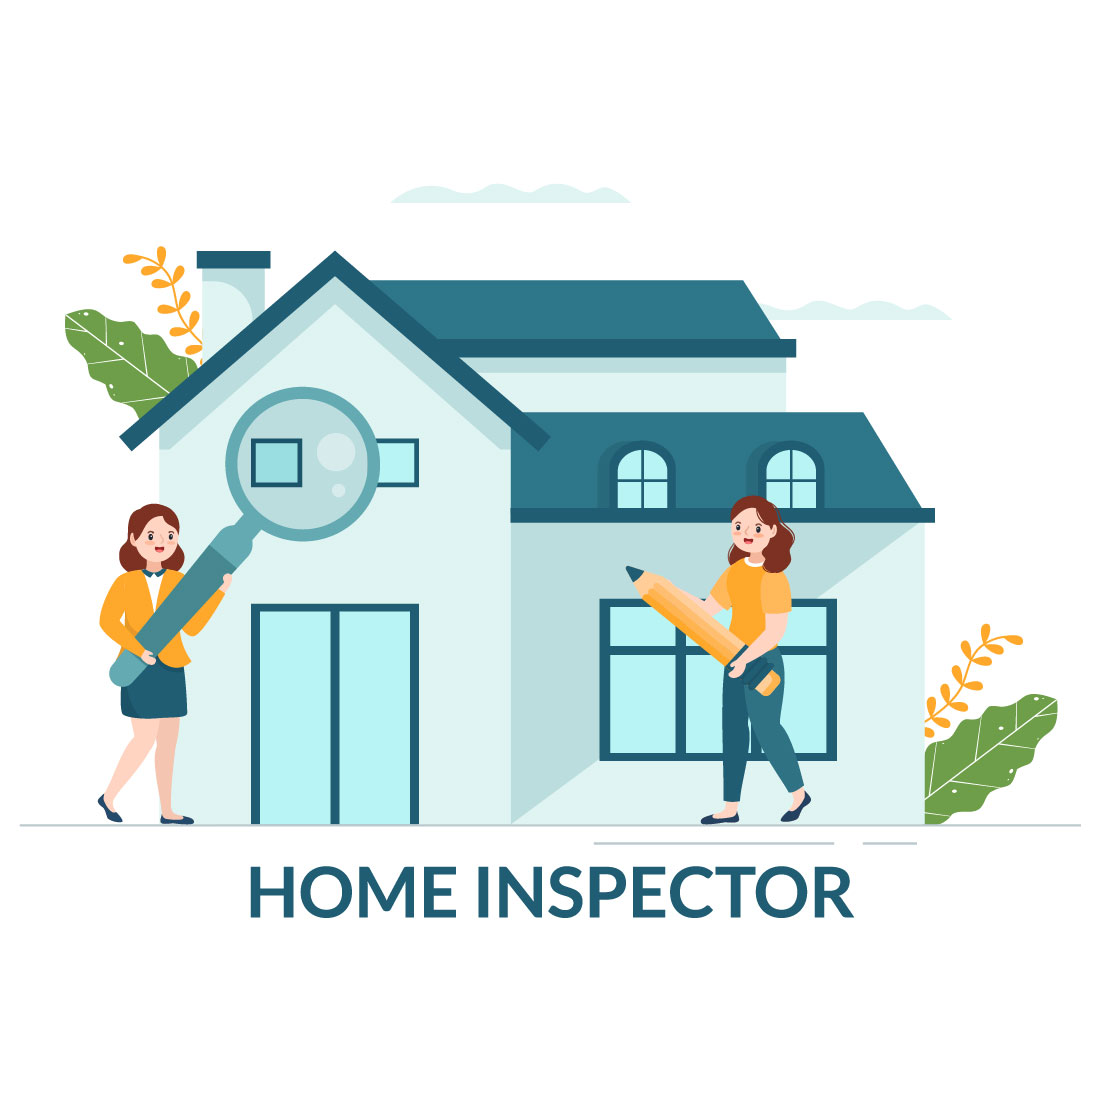 Home Inspector Cartoon Illustration cover image.